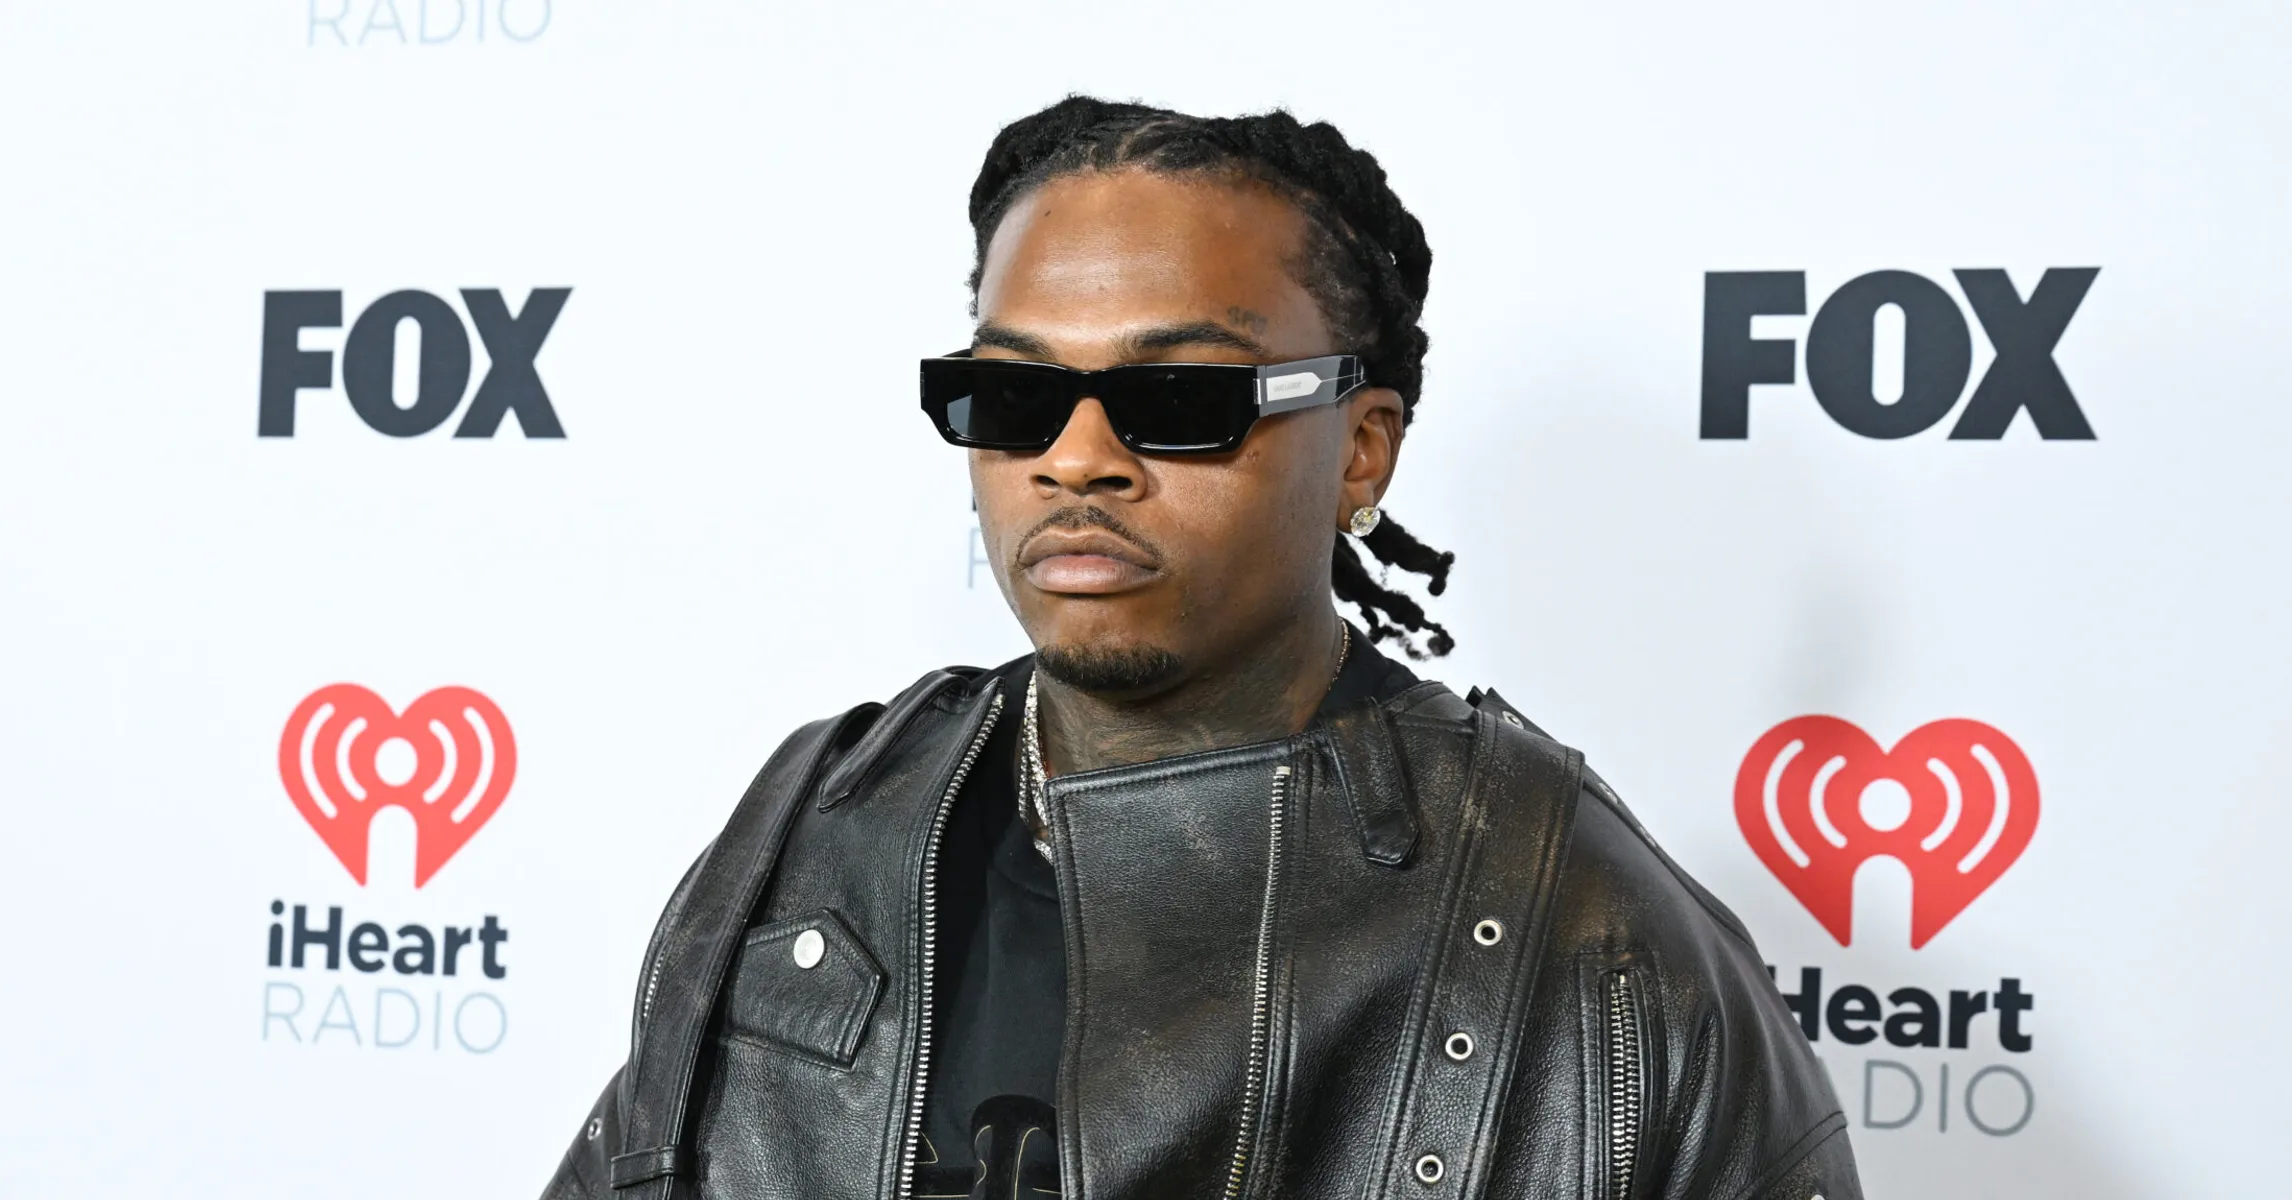 Gunna Reveals How He Lost “30-40 Pounds” After Prison Release